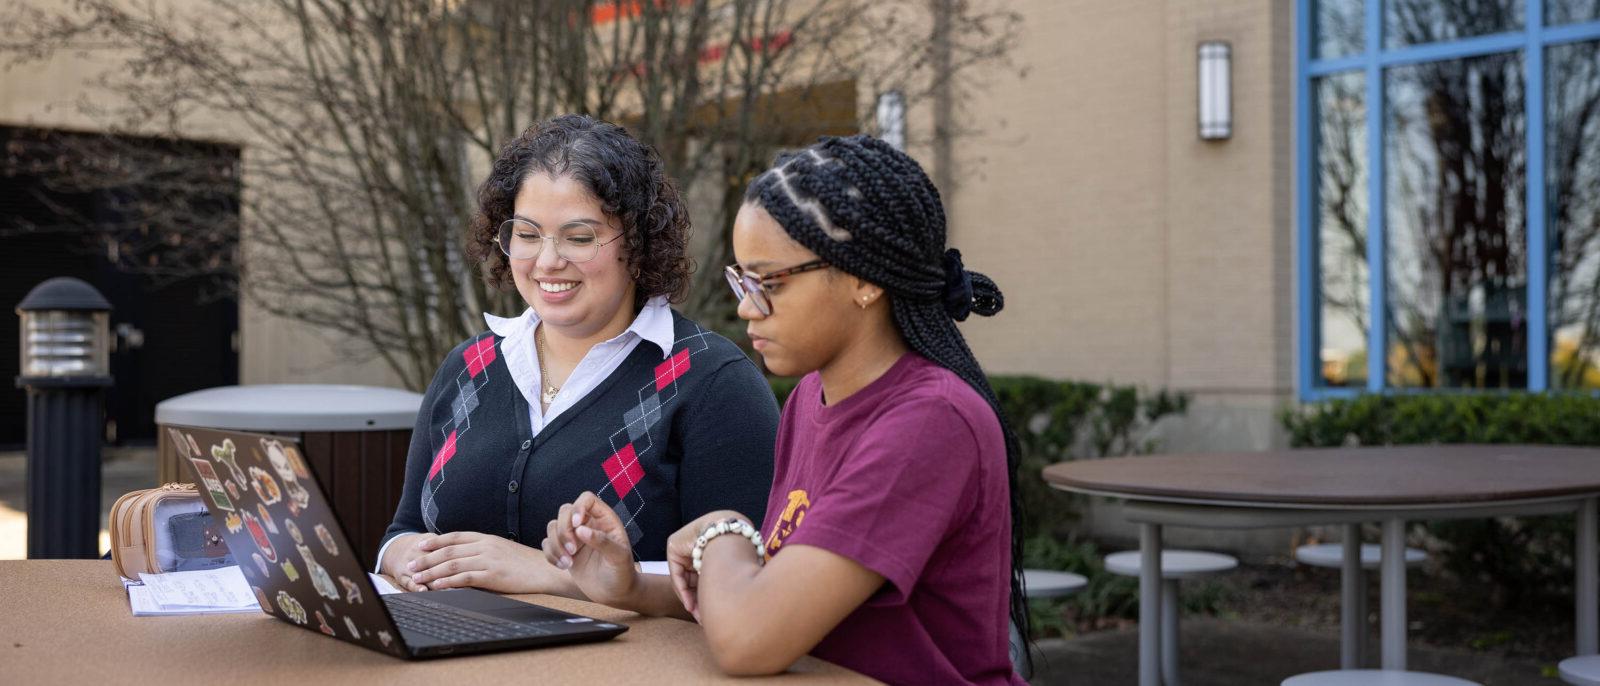 Female students working on laptop outside